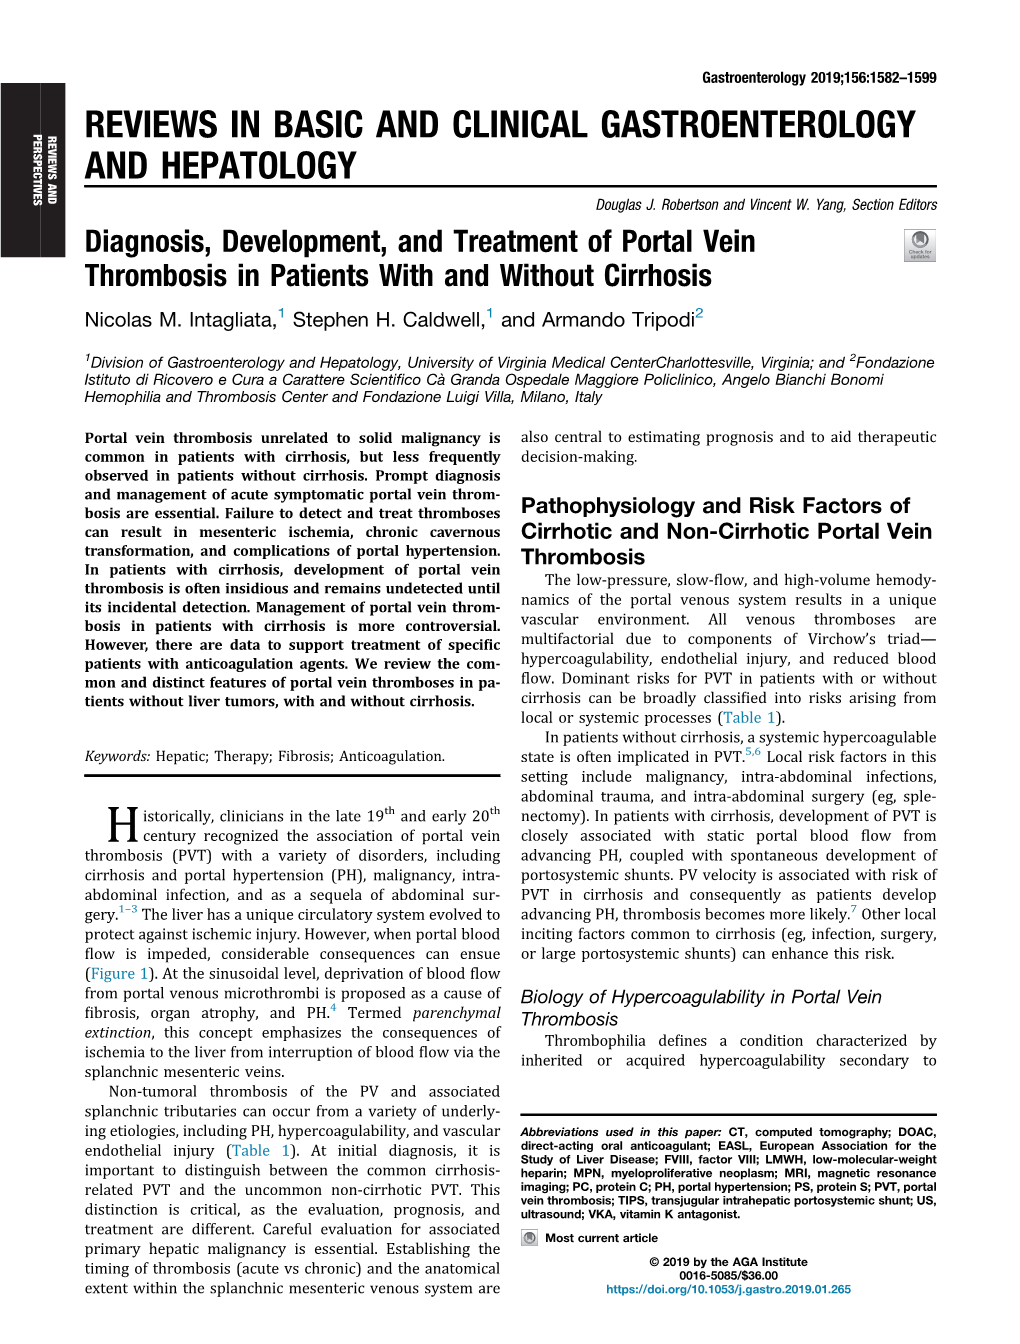 Diagnosis, Development, and Treatment of Portal Vein Thrombosis in Patients with and Without Cirrhosis Nicolas M